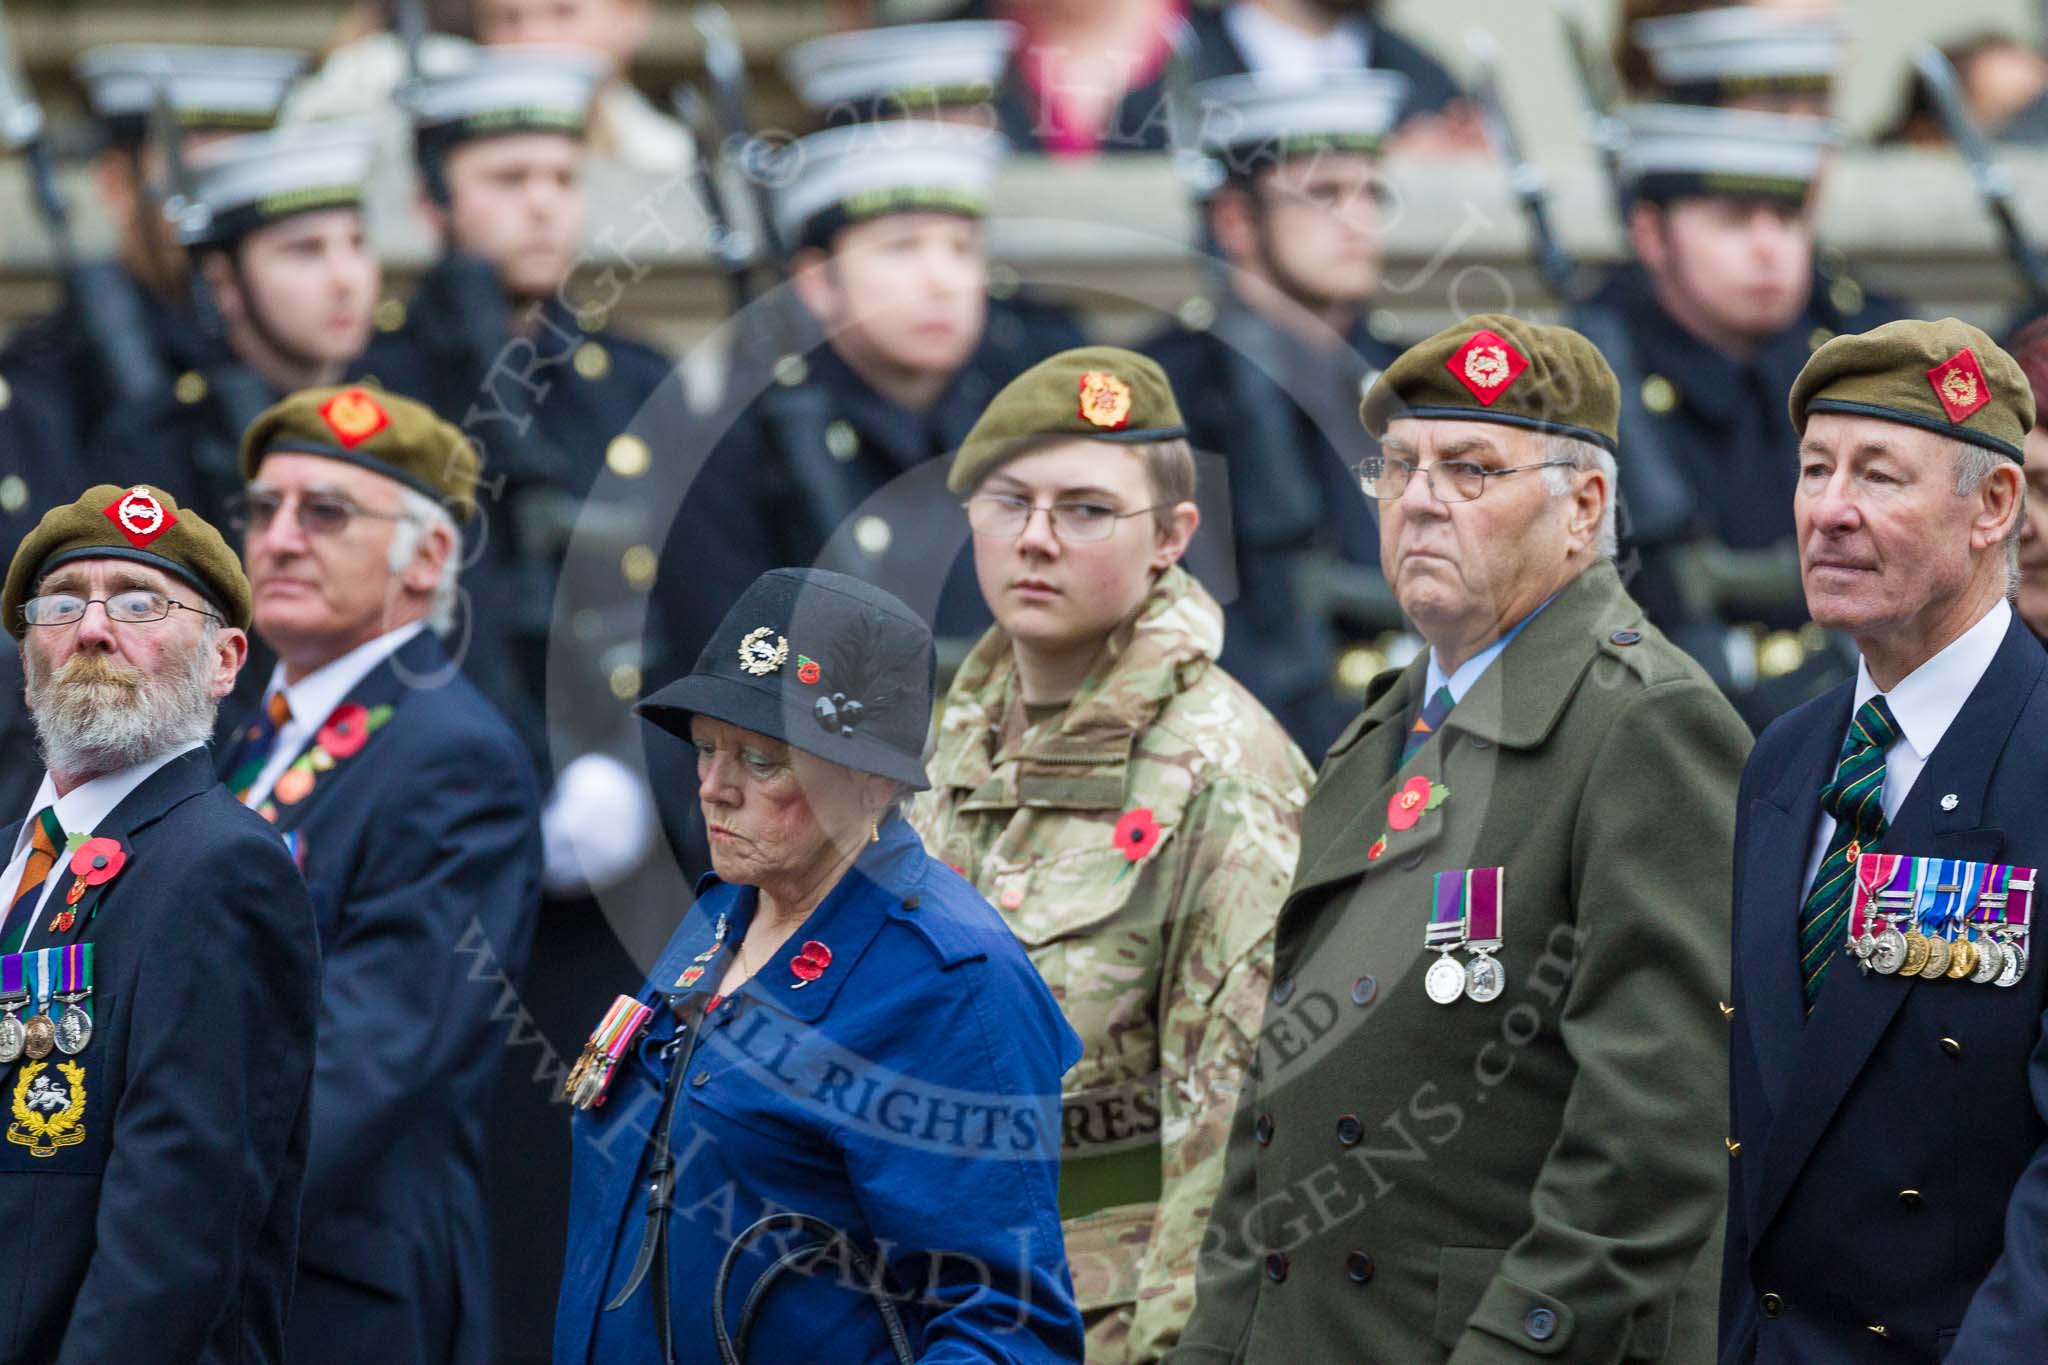 Remembrance Sunday at the Cenotaph 2015: Group A27, The King's Own Royal Border Regiment.
Cenotaph, Whitehall, London SW1,
London,
Greater London,
United Kingdom,
on 08 November 2015 at 12:13, image #1374